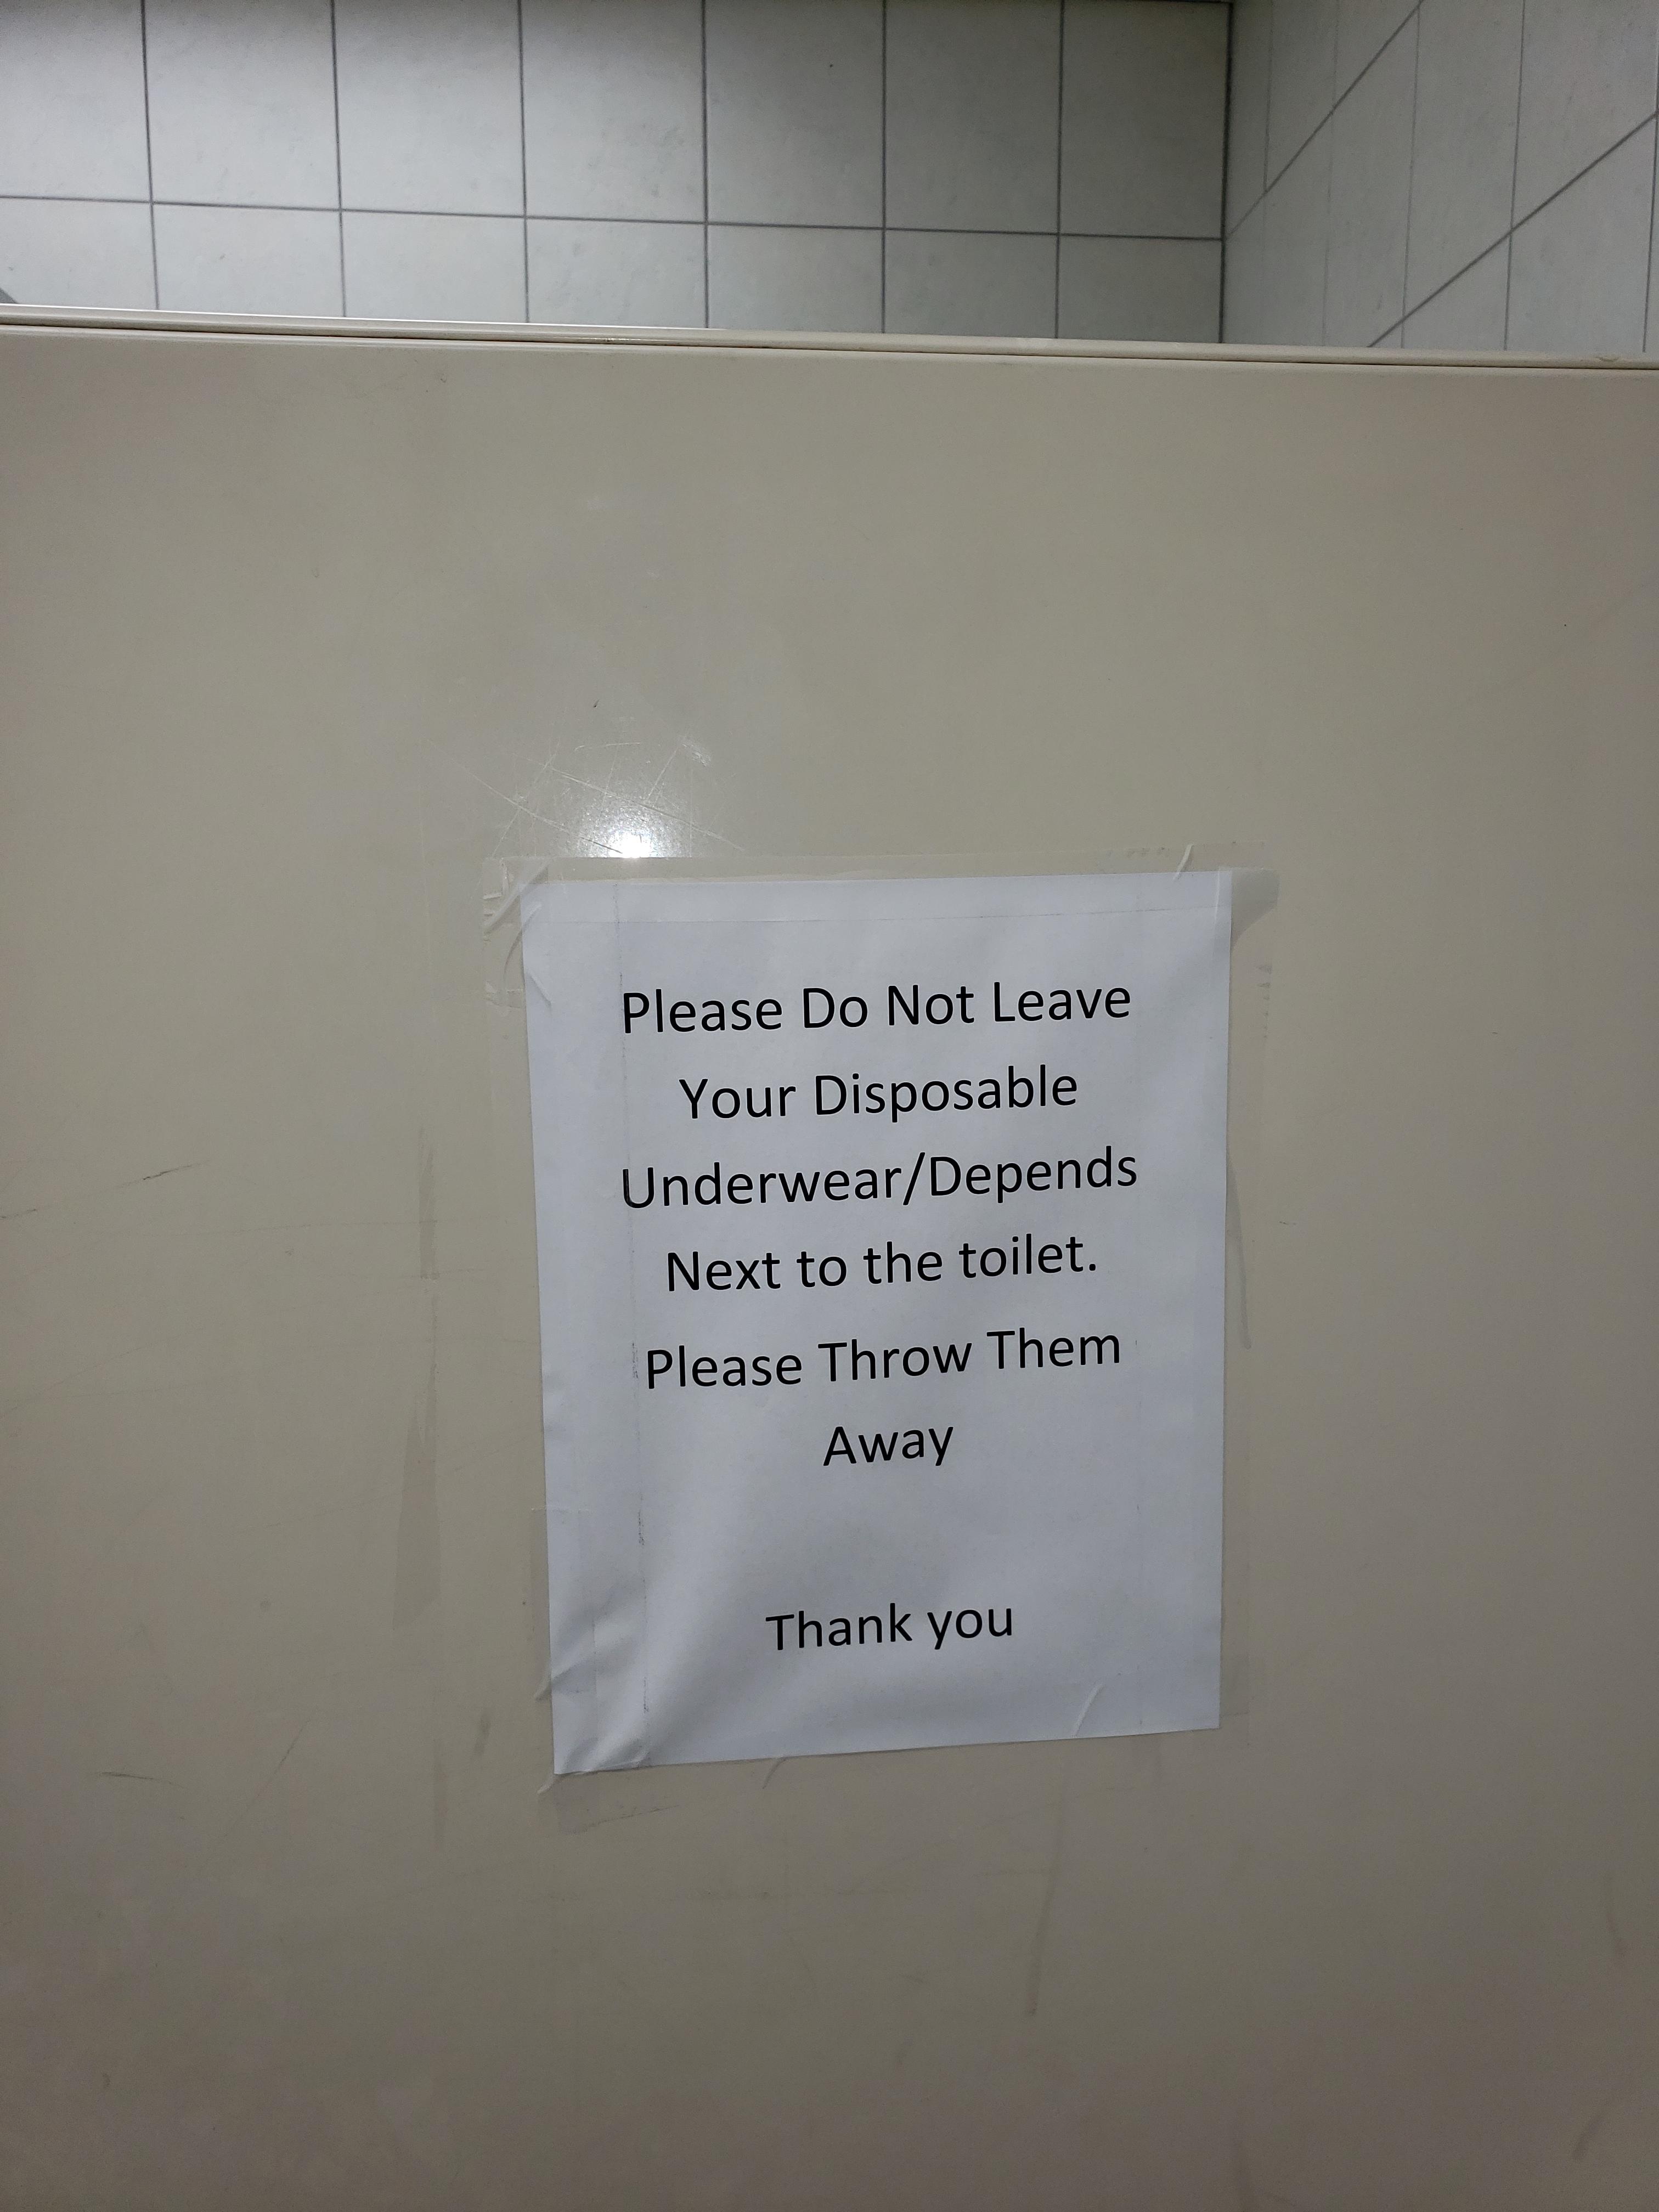 sign - Please Do Not Leave Your Disposable UnderwearDepends Next to the toilet. Please Throw Them Away Thank you